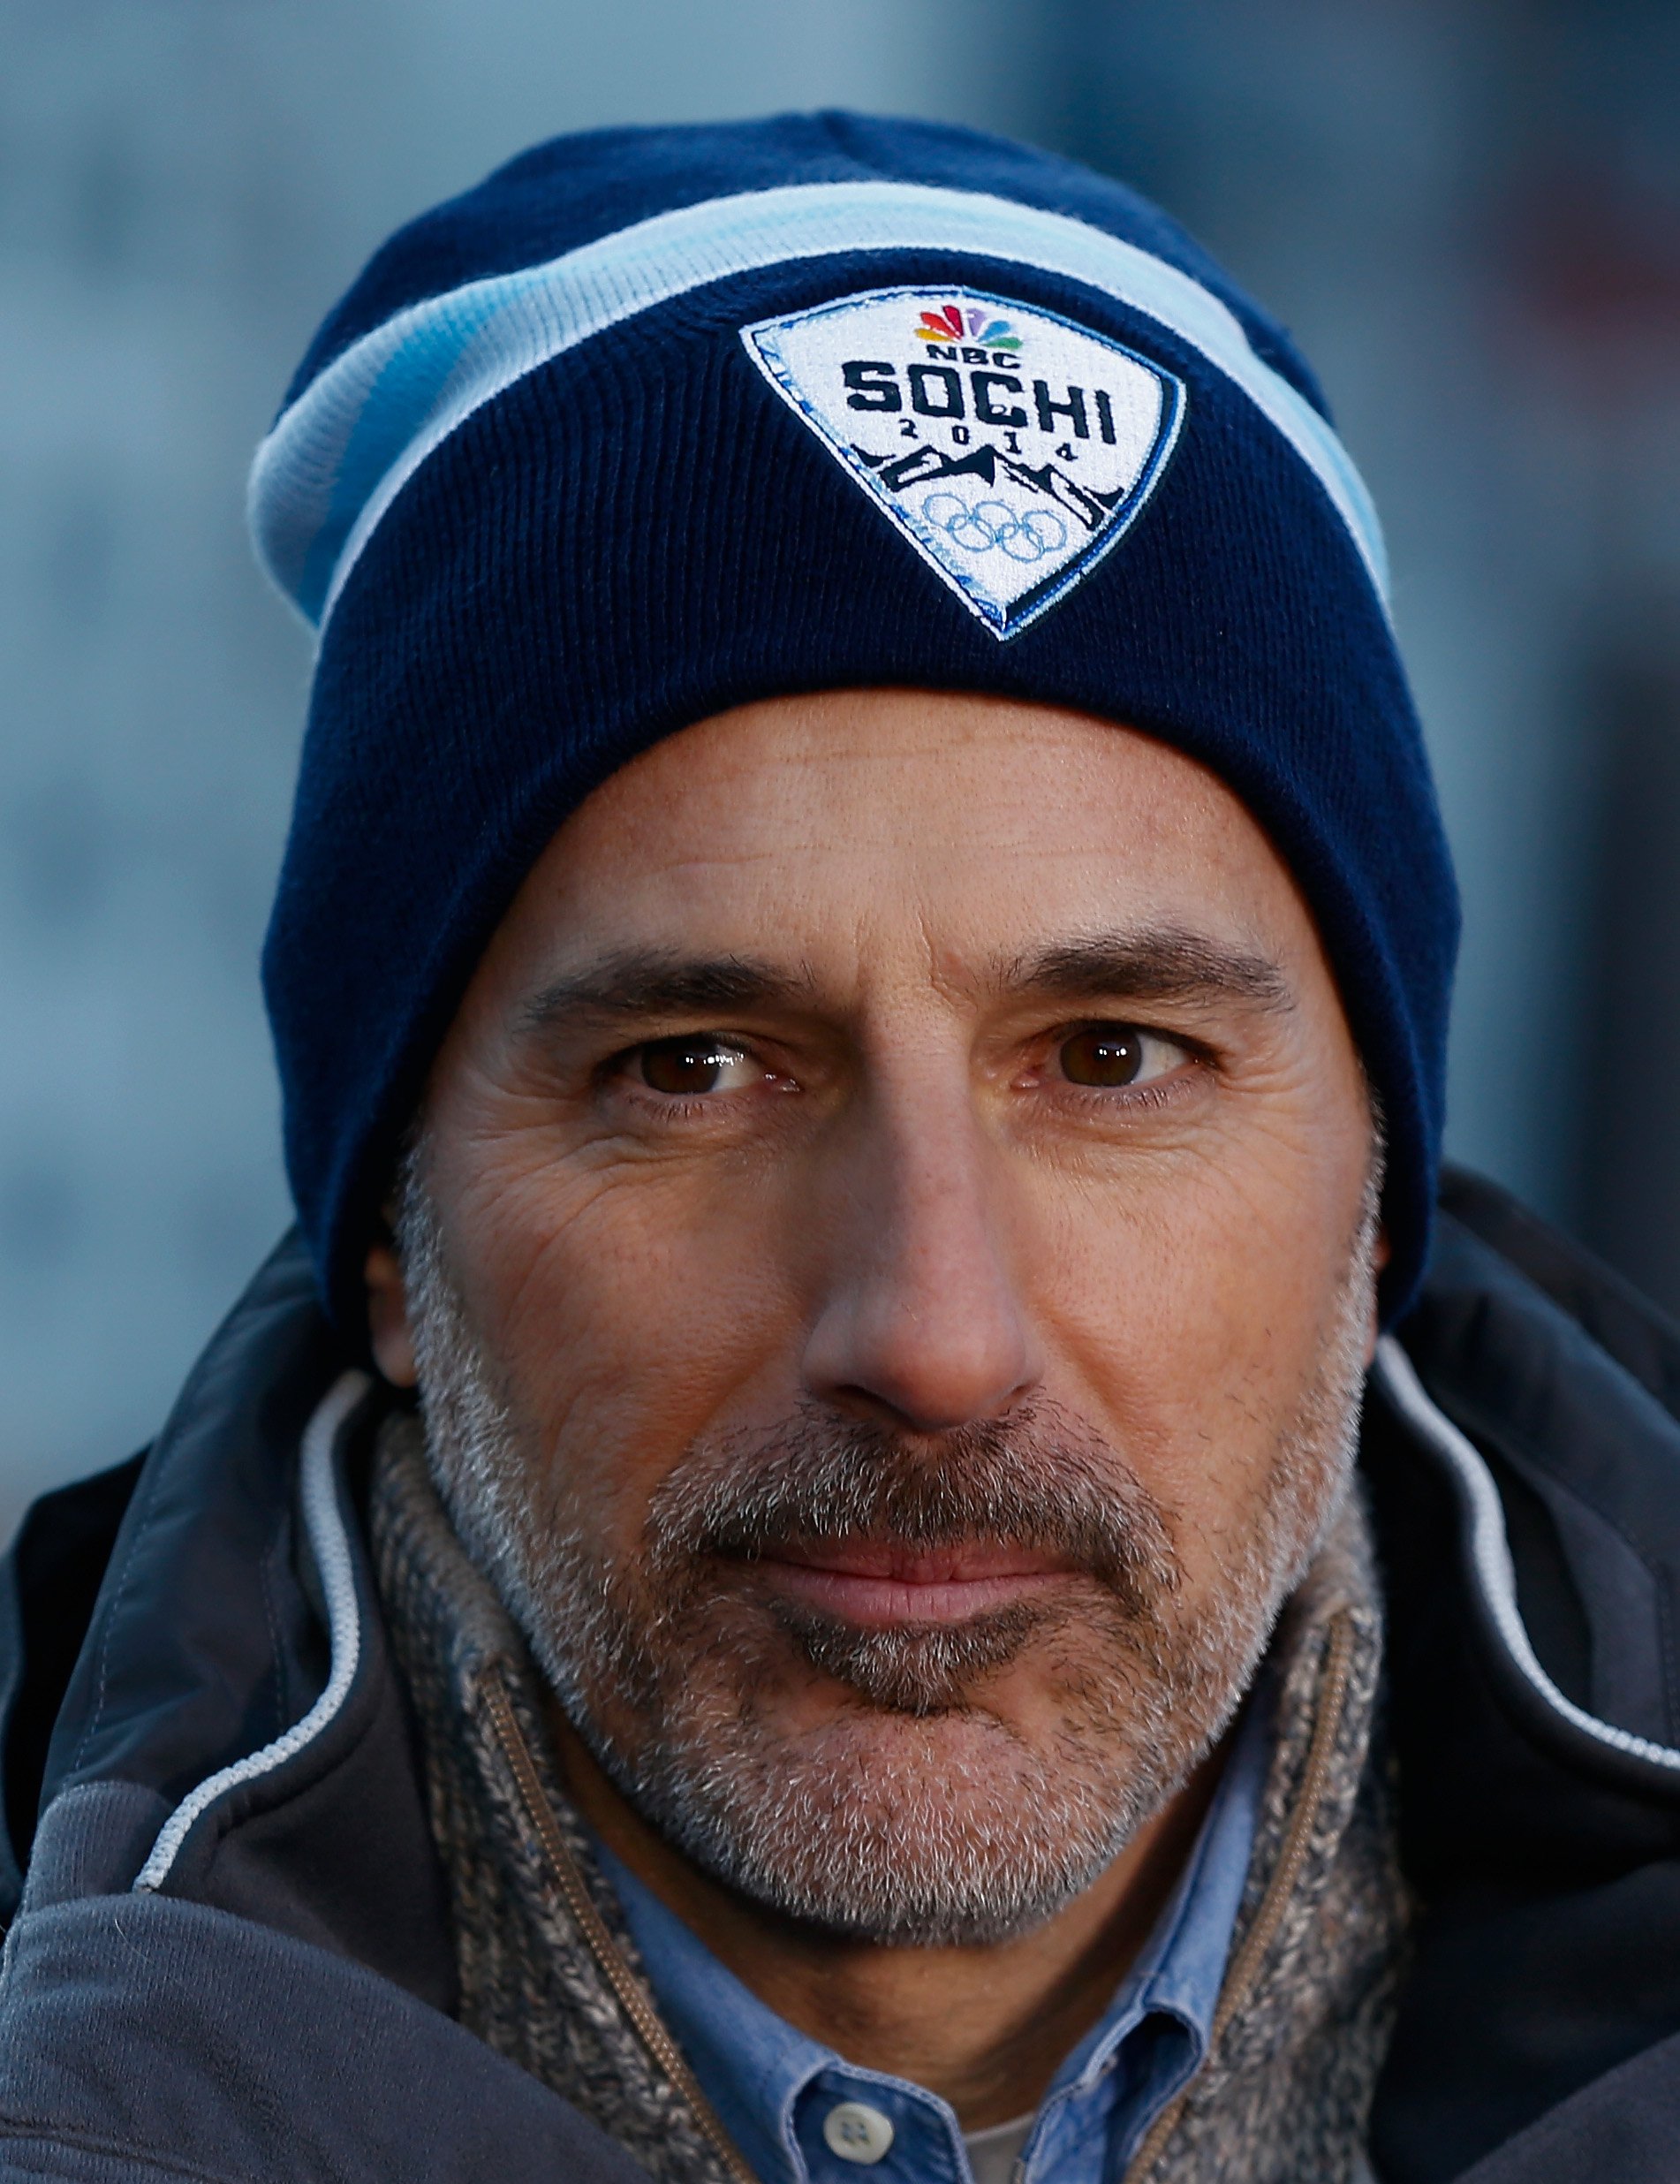 Matt Lauer reports for the "TODAY" Show ahead of the 2014 Winter Olympics on February 6, 2014, in Sochi, Russia. | Source: Getty Images.